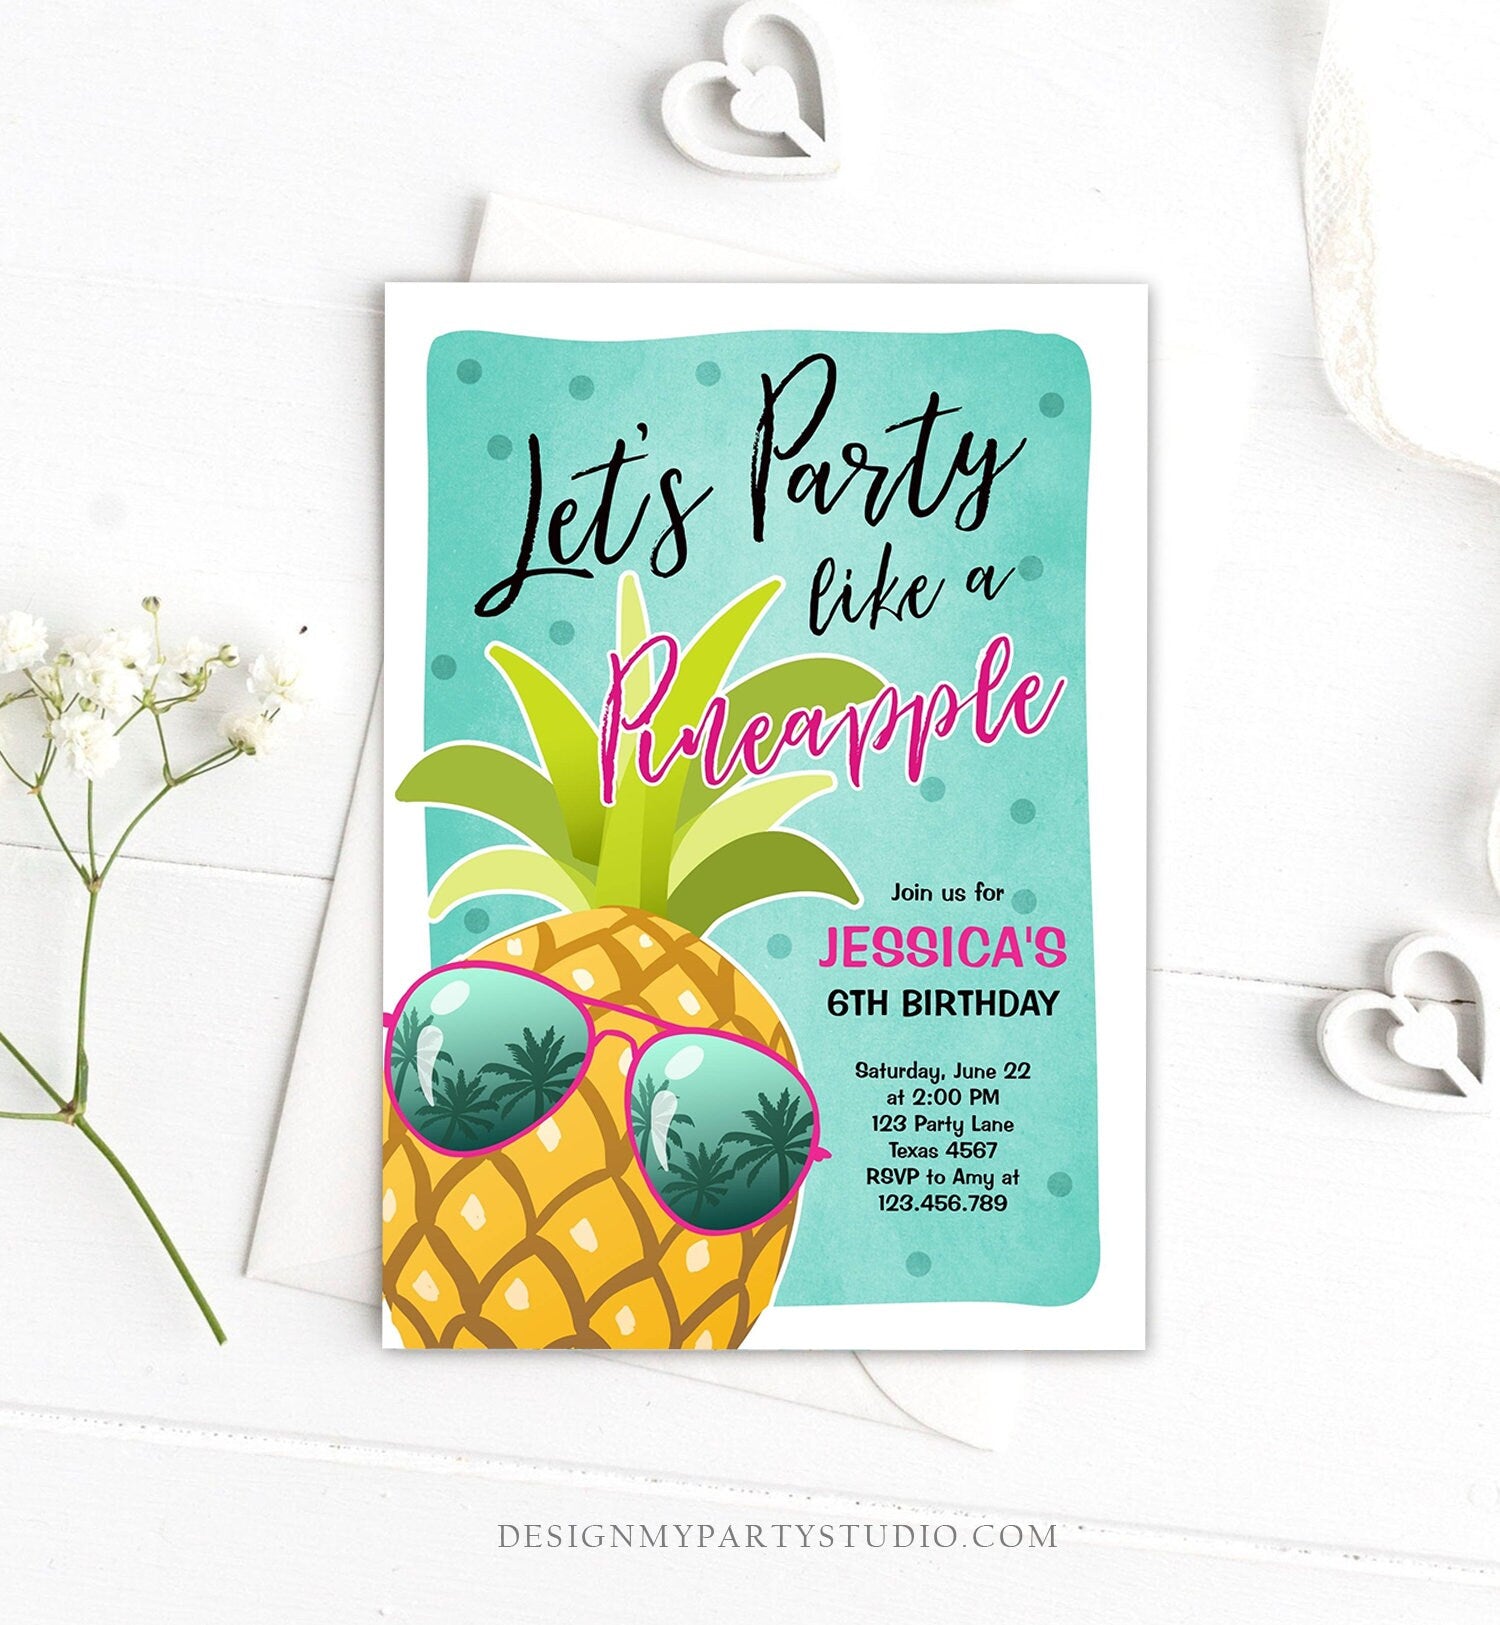 Editable Pineapple Birthday Invitation Lets Party Like a Pineapple Invite Tropical Party Aloha Girl Download Printable Template Corjl 0203